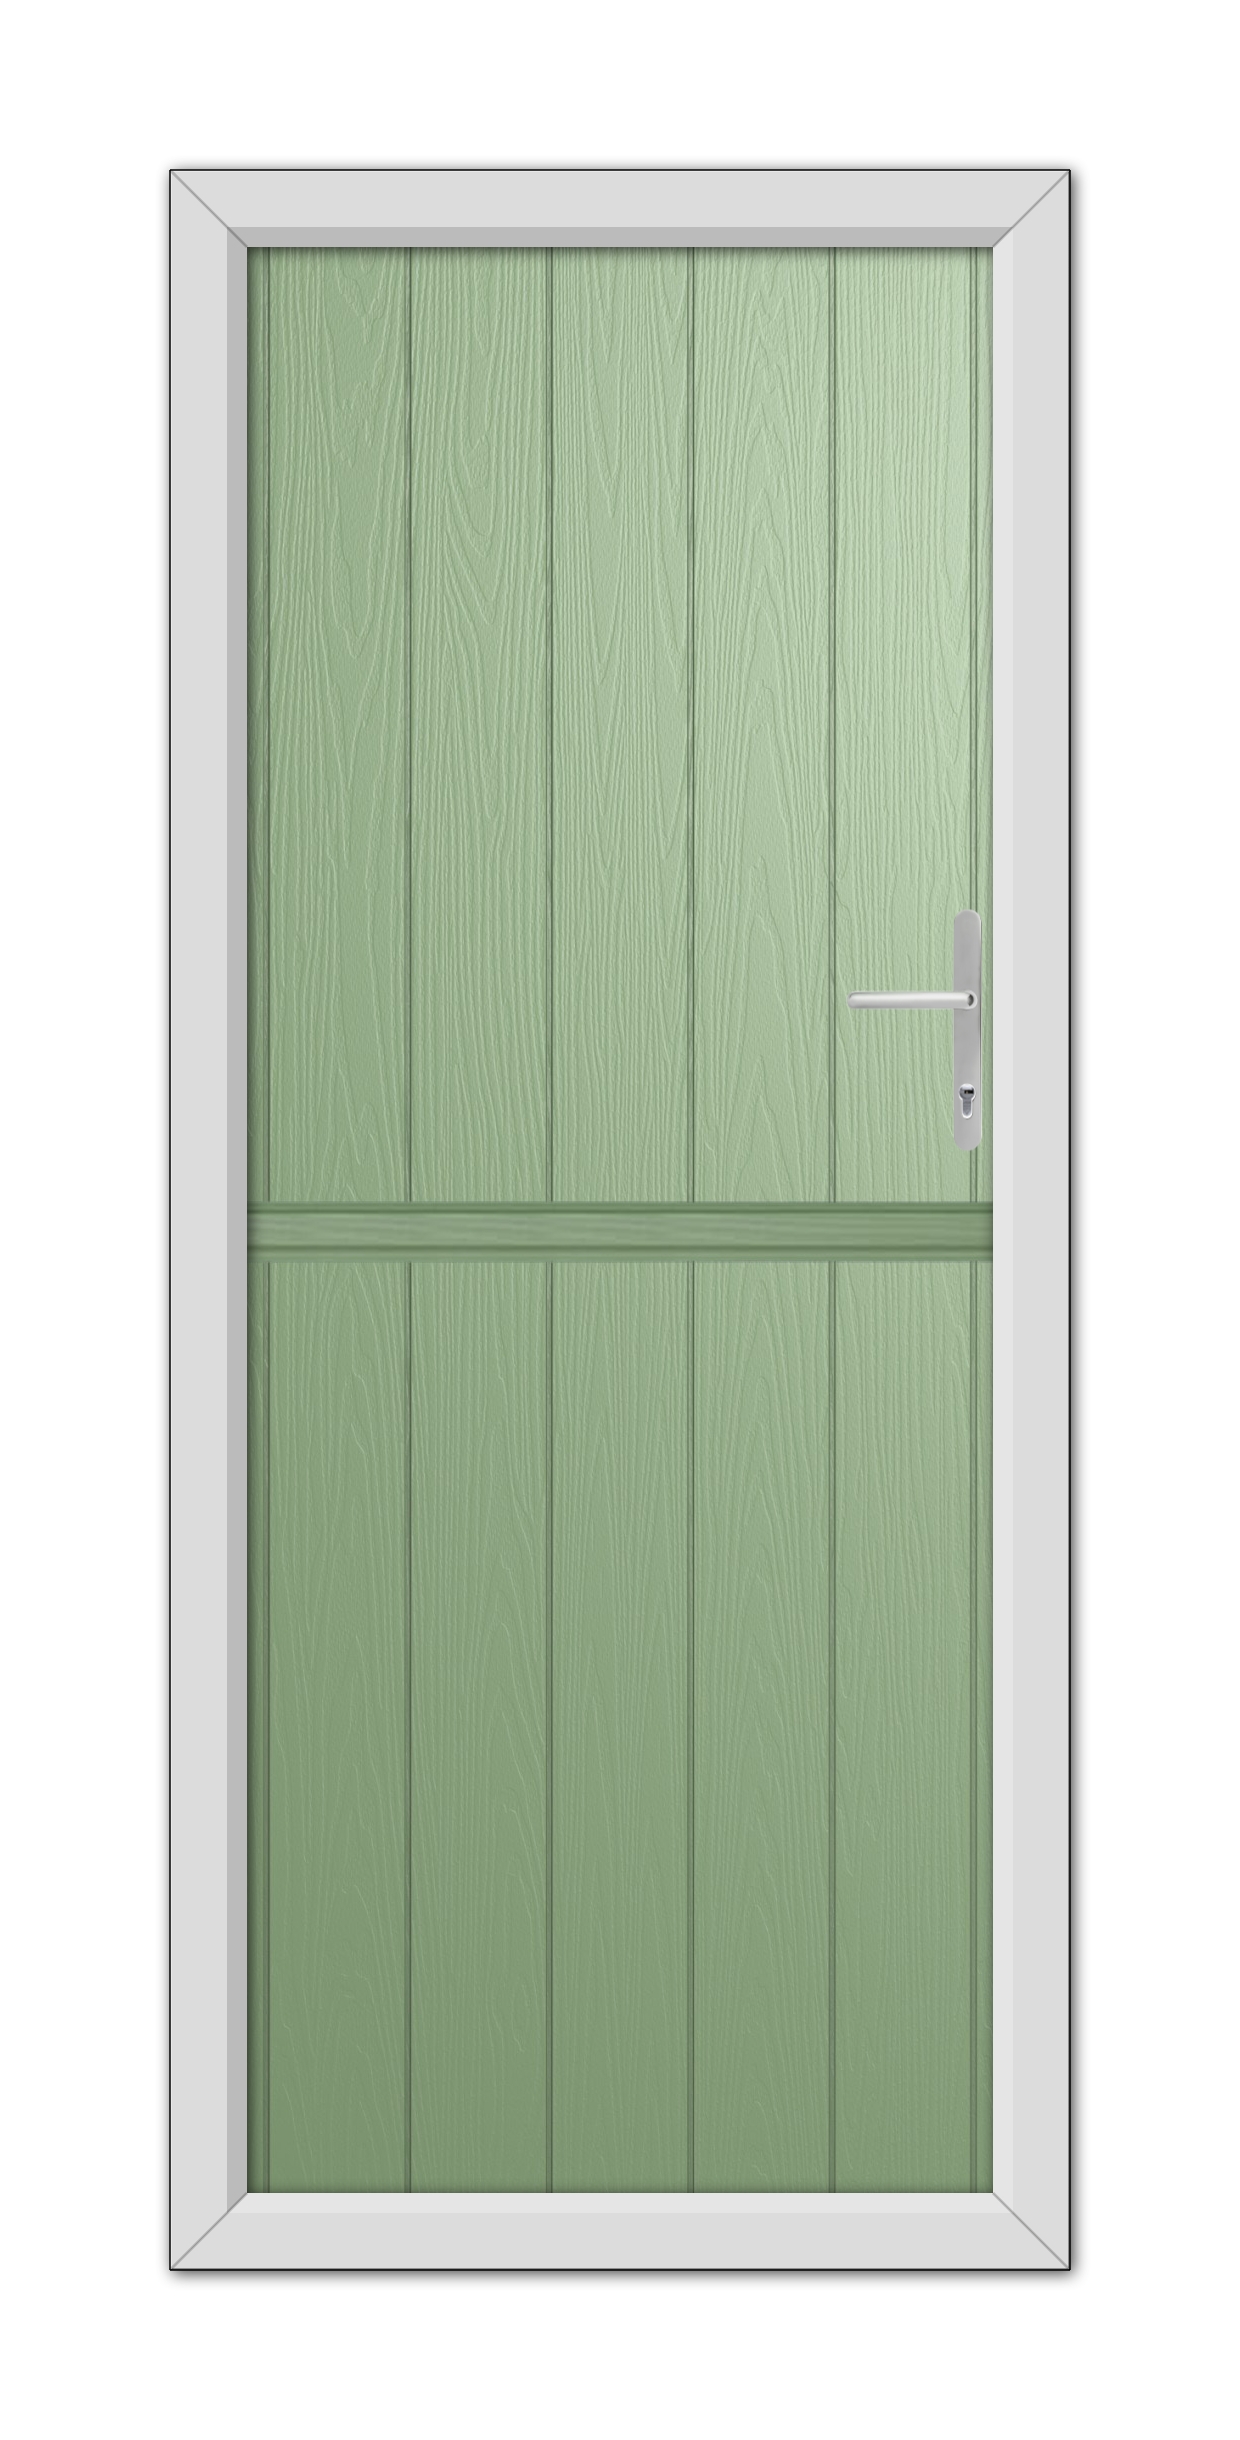 A Chartwell Green Gloucester Stable Composite Door 48mm Timber Core with a modern handle, set within a silver frame, displayed against a white background.